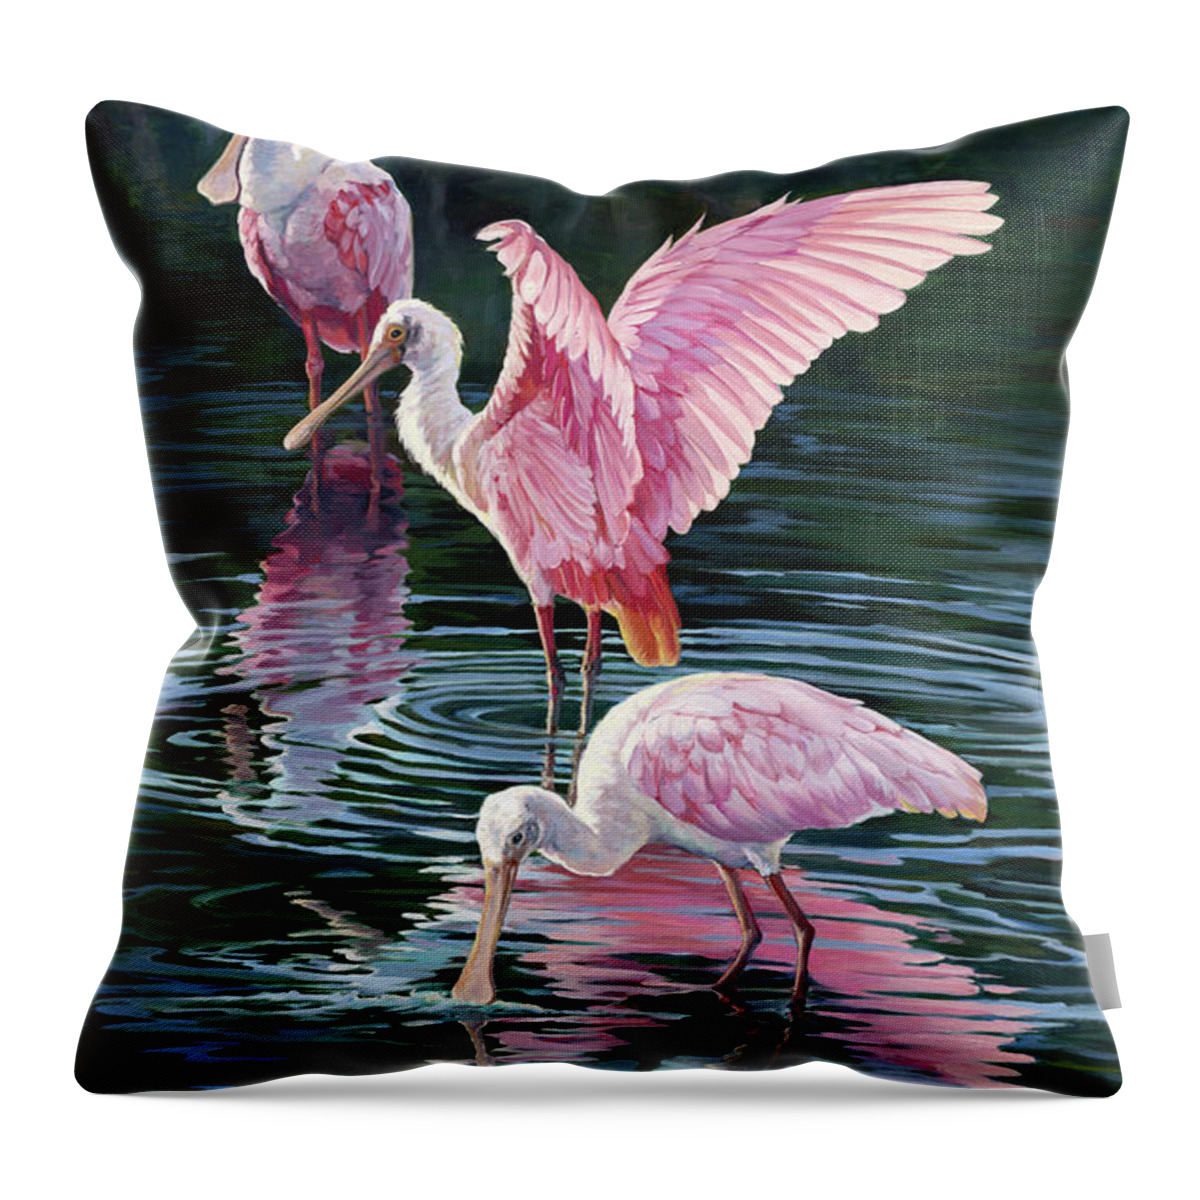 Spoonbills Throw Pillow featuring the painting Pink Spoonbills by Laurie Snow Hein